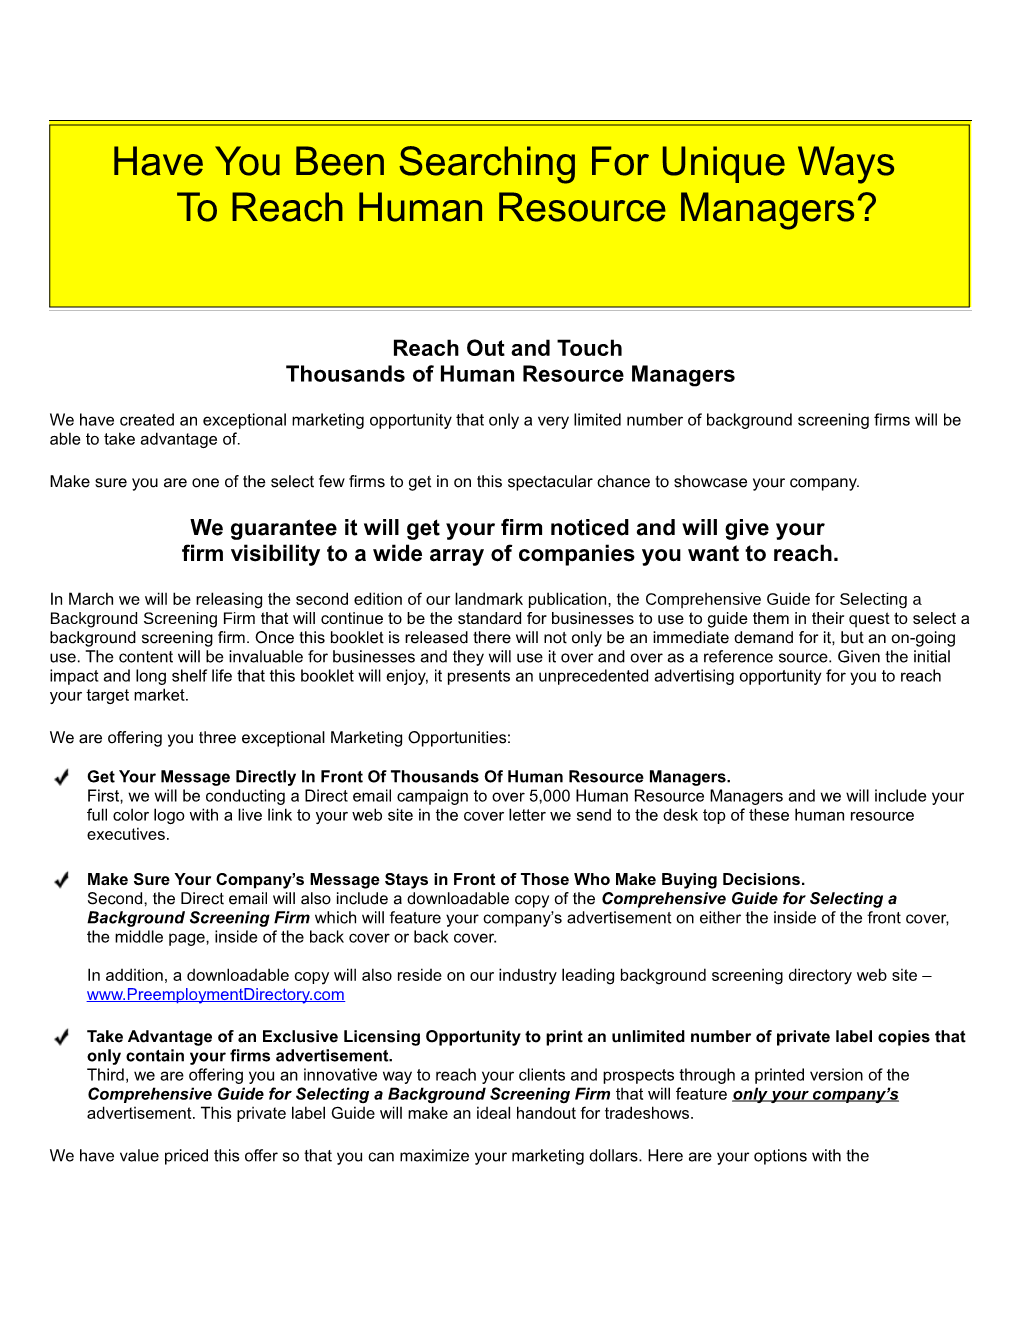 Have You Been Searching for Unique Ways to Reach Human Resource Managers That Is Not Cluttered